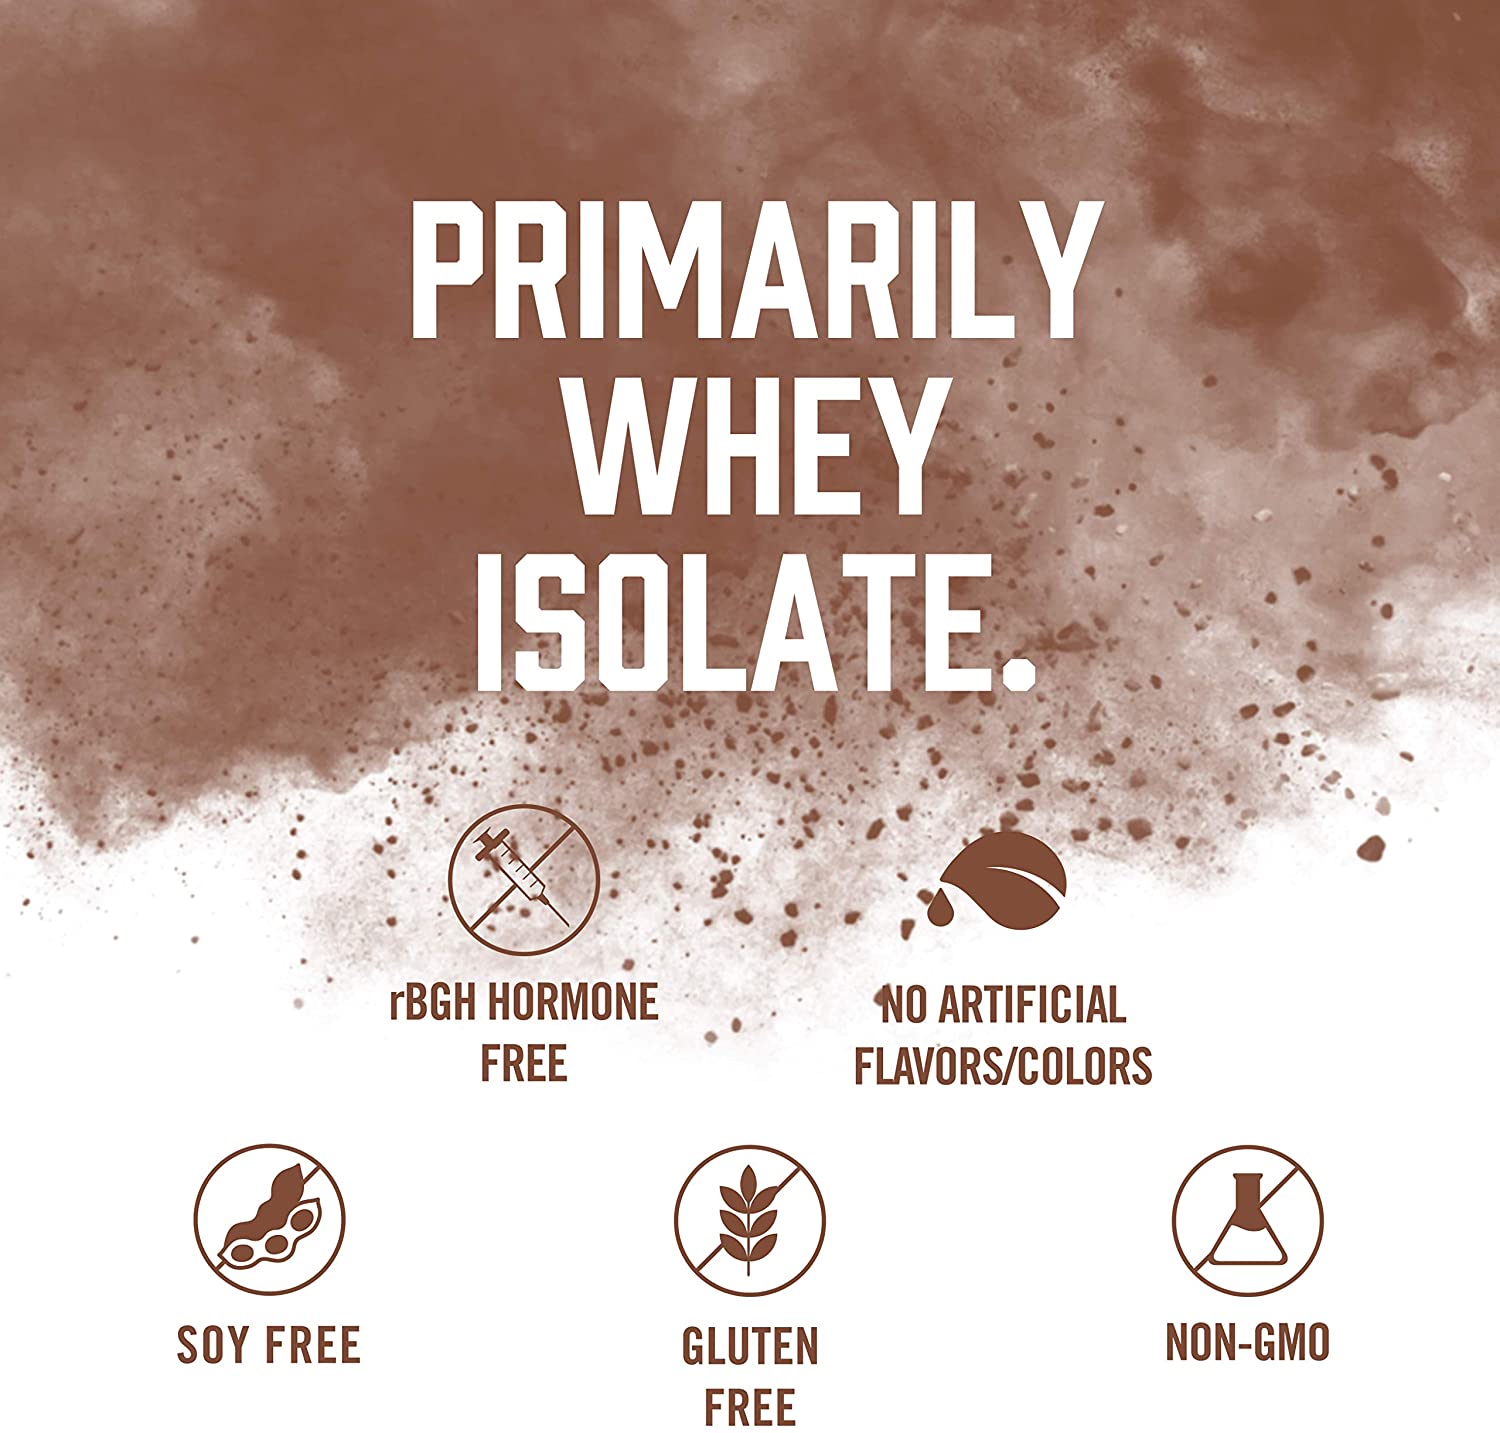 Biosteel Whey Protein Isolate 816g / Chocolate, primarily whey isolate, SNS Health, Sports Nutrition